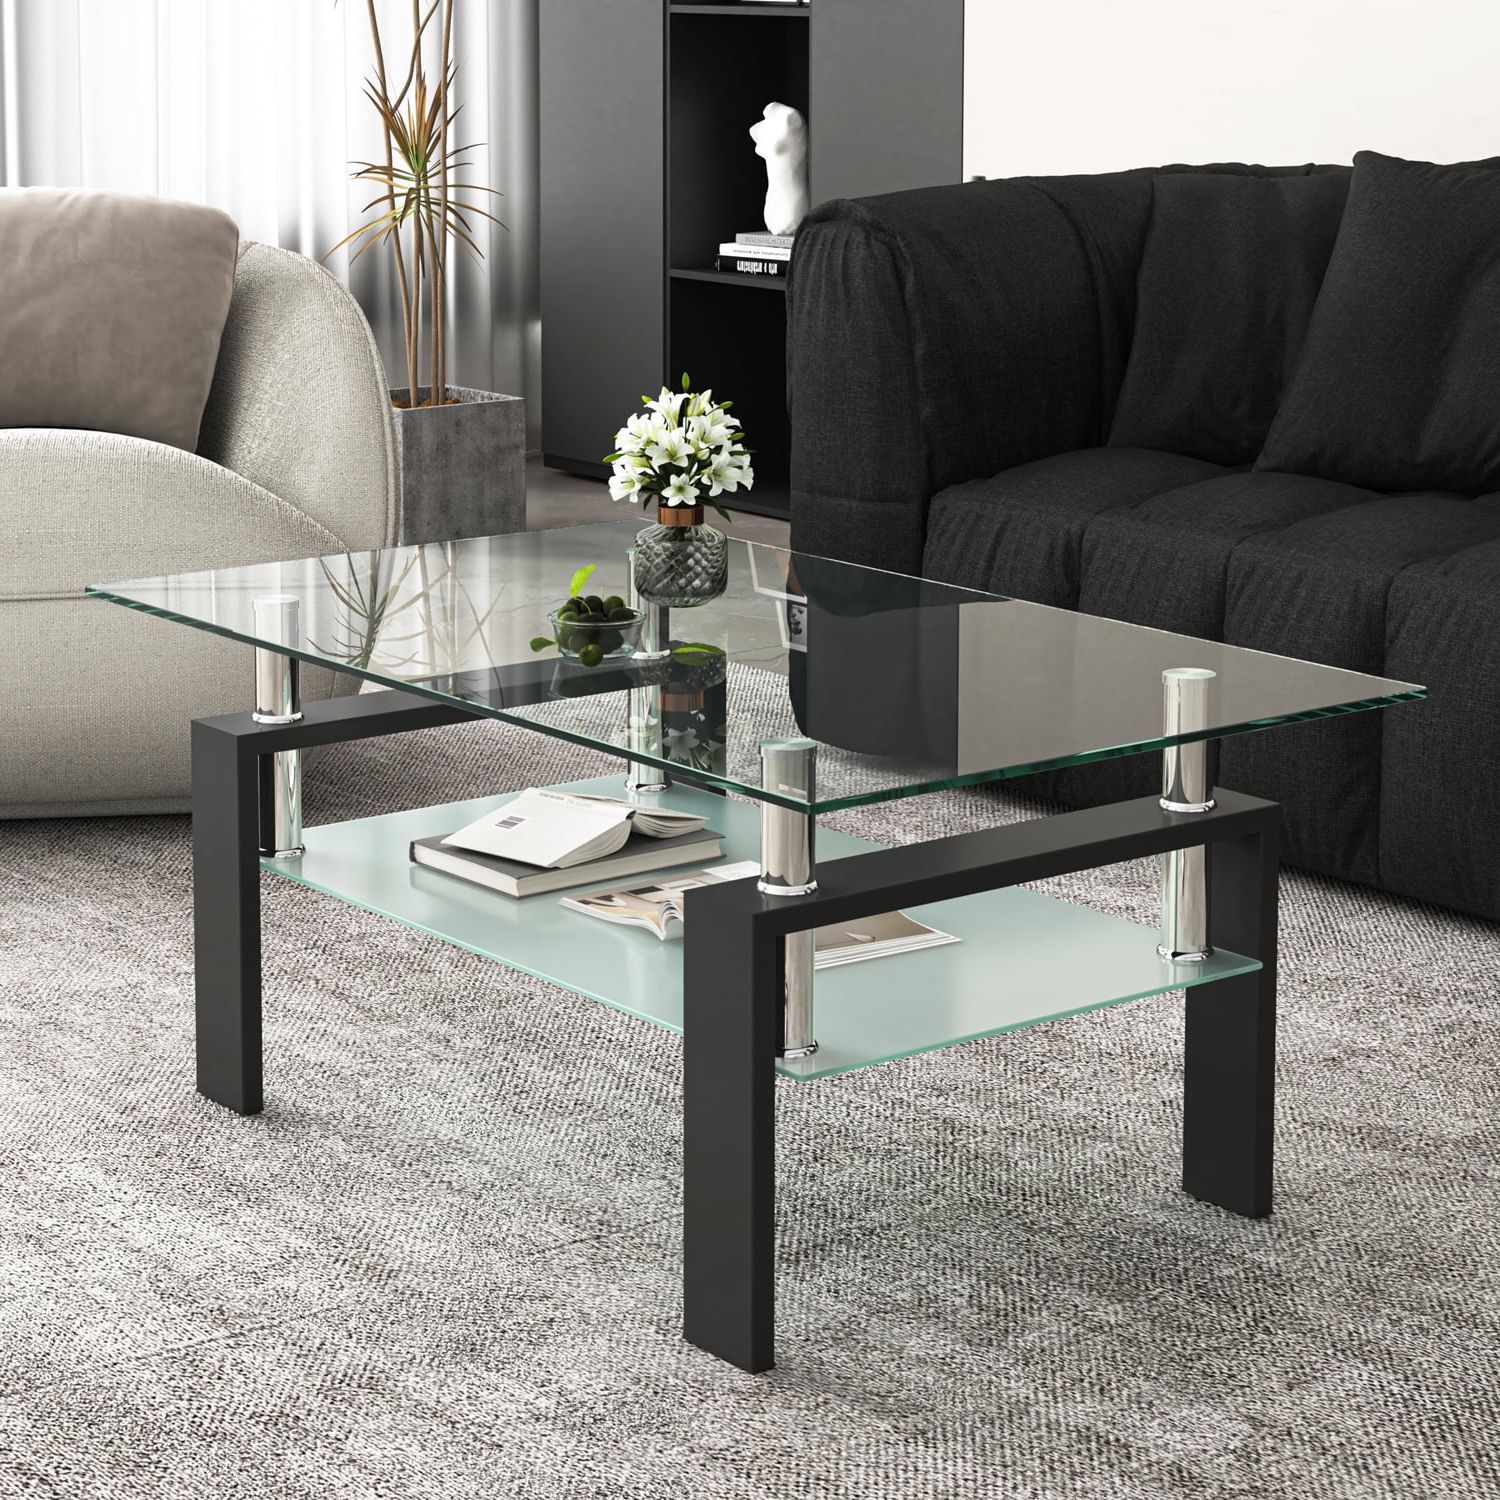 Most Recently Released Wood Tempered Glass Top Coffee Tables Intended For Hommoo Rectangular Glass Coffee Table, Wood Tempered Glass Top Coffee Table  Rectangular W/ Shelf Home Furniture, Center Table Sofa Table Home Furniture  For Living Room, Black – Walmart (View 6 of 10)